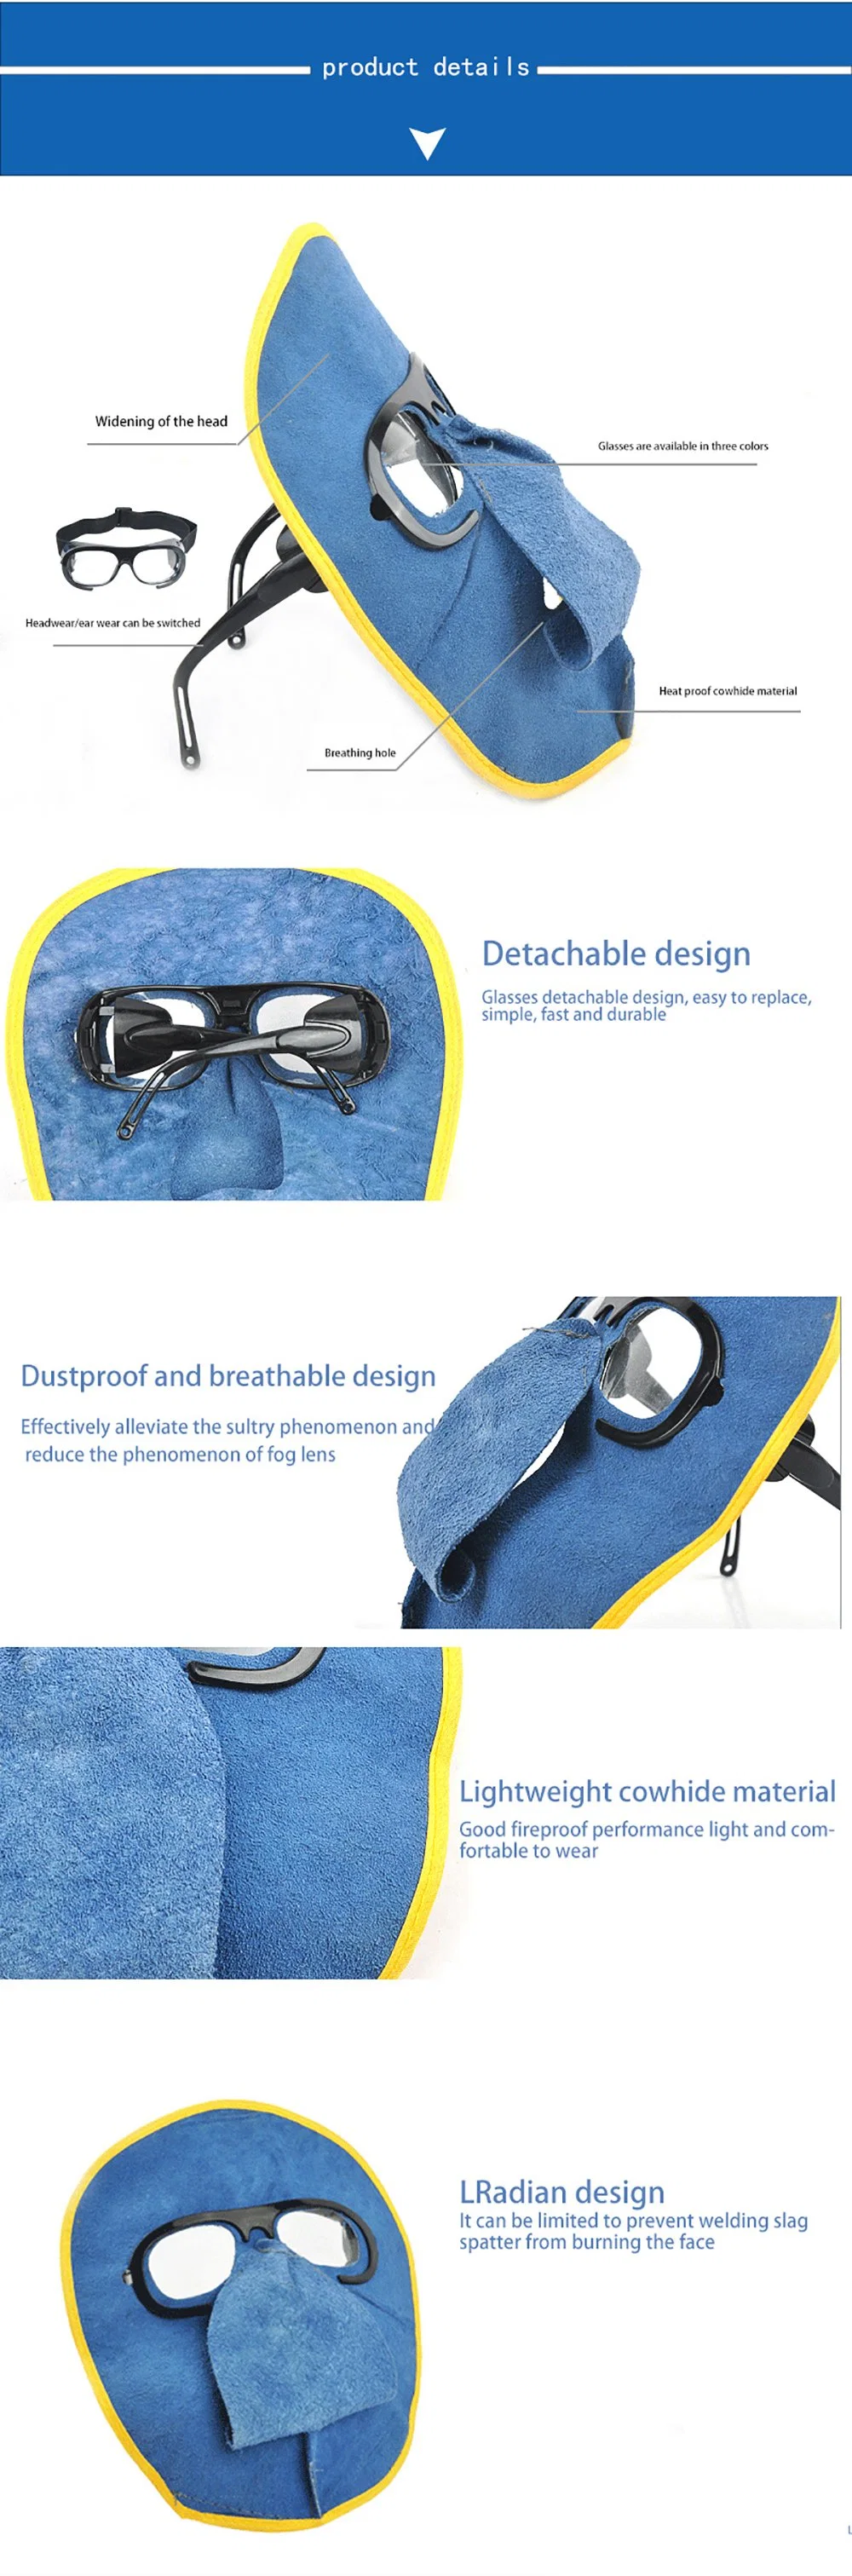 Leather Welding Protective Mask for Portable Detachable Glasses